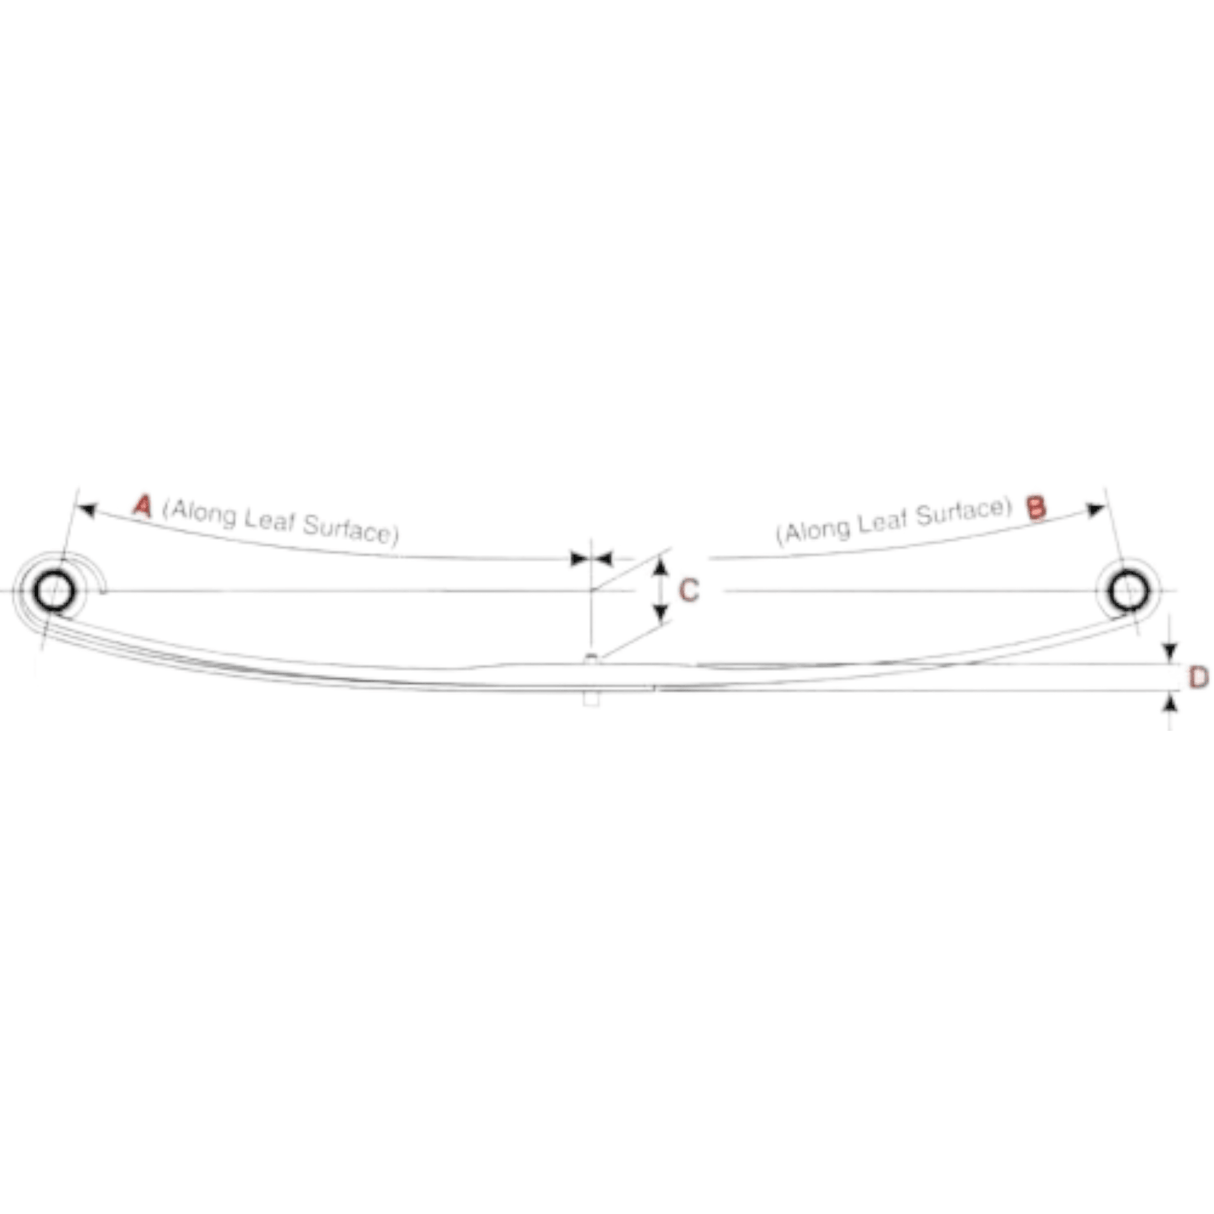 46-1772 Front Truck Leaf Spring A16-16790-003 We Can Ship Pair X 2.